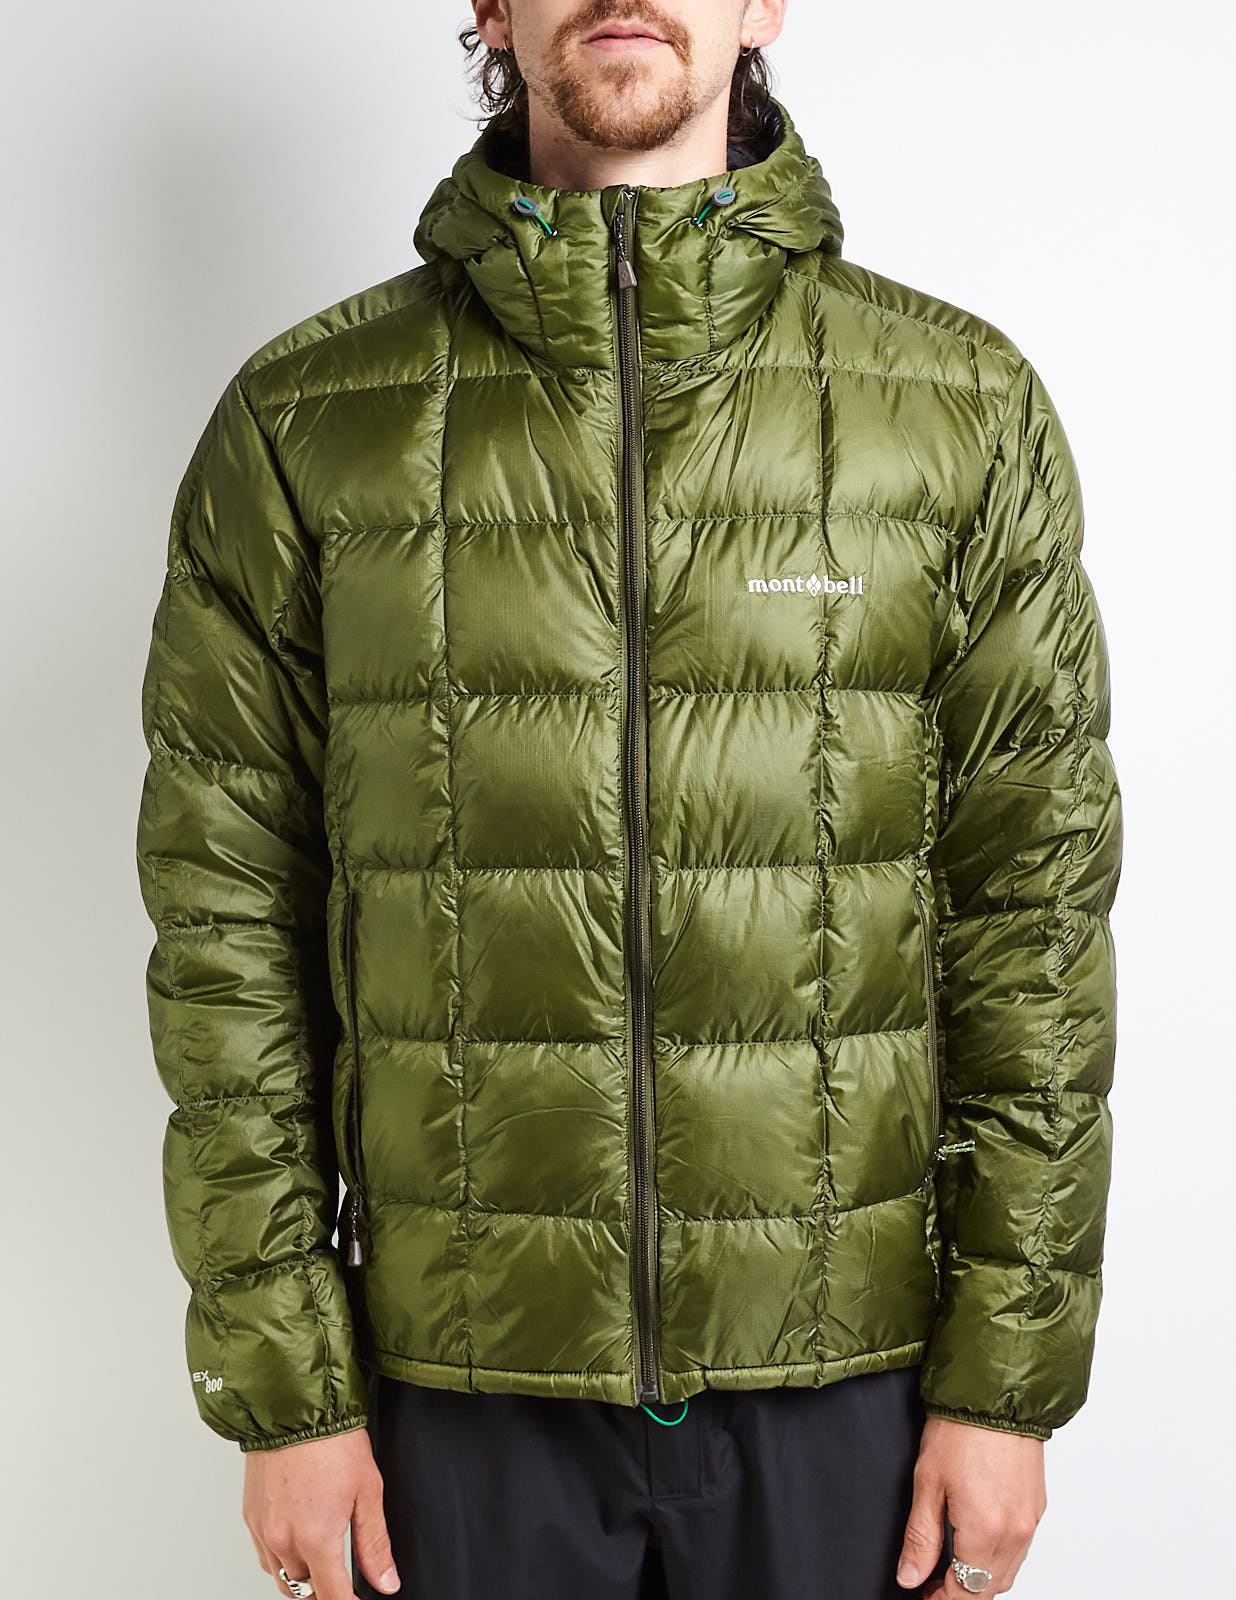 Montbell Superior Down Parka Men's Size: L / Color (style): blue green